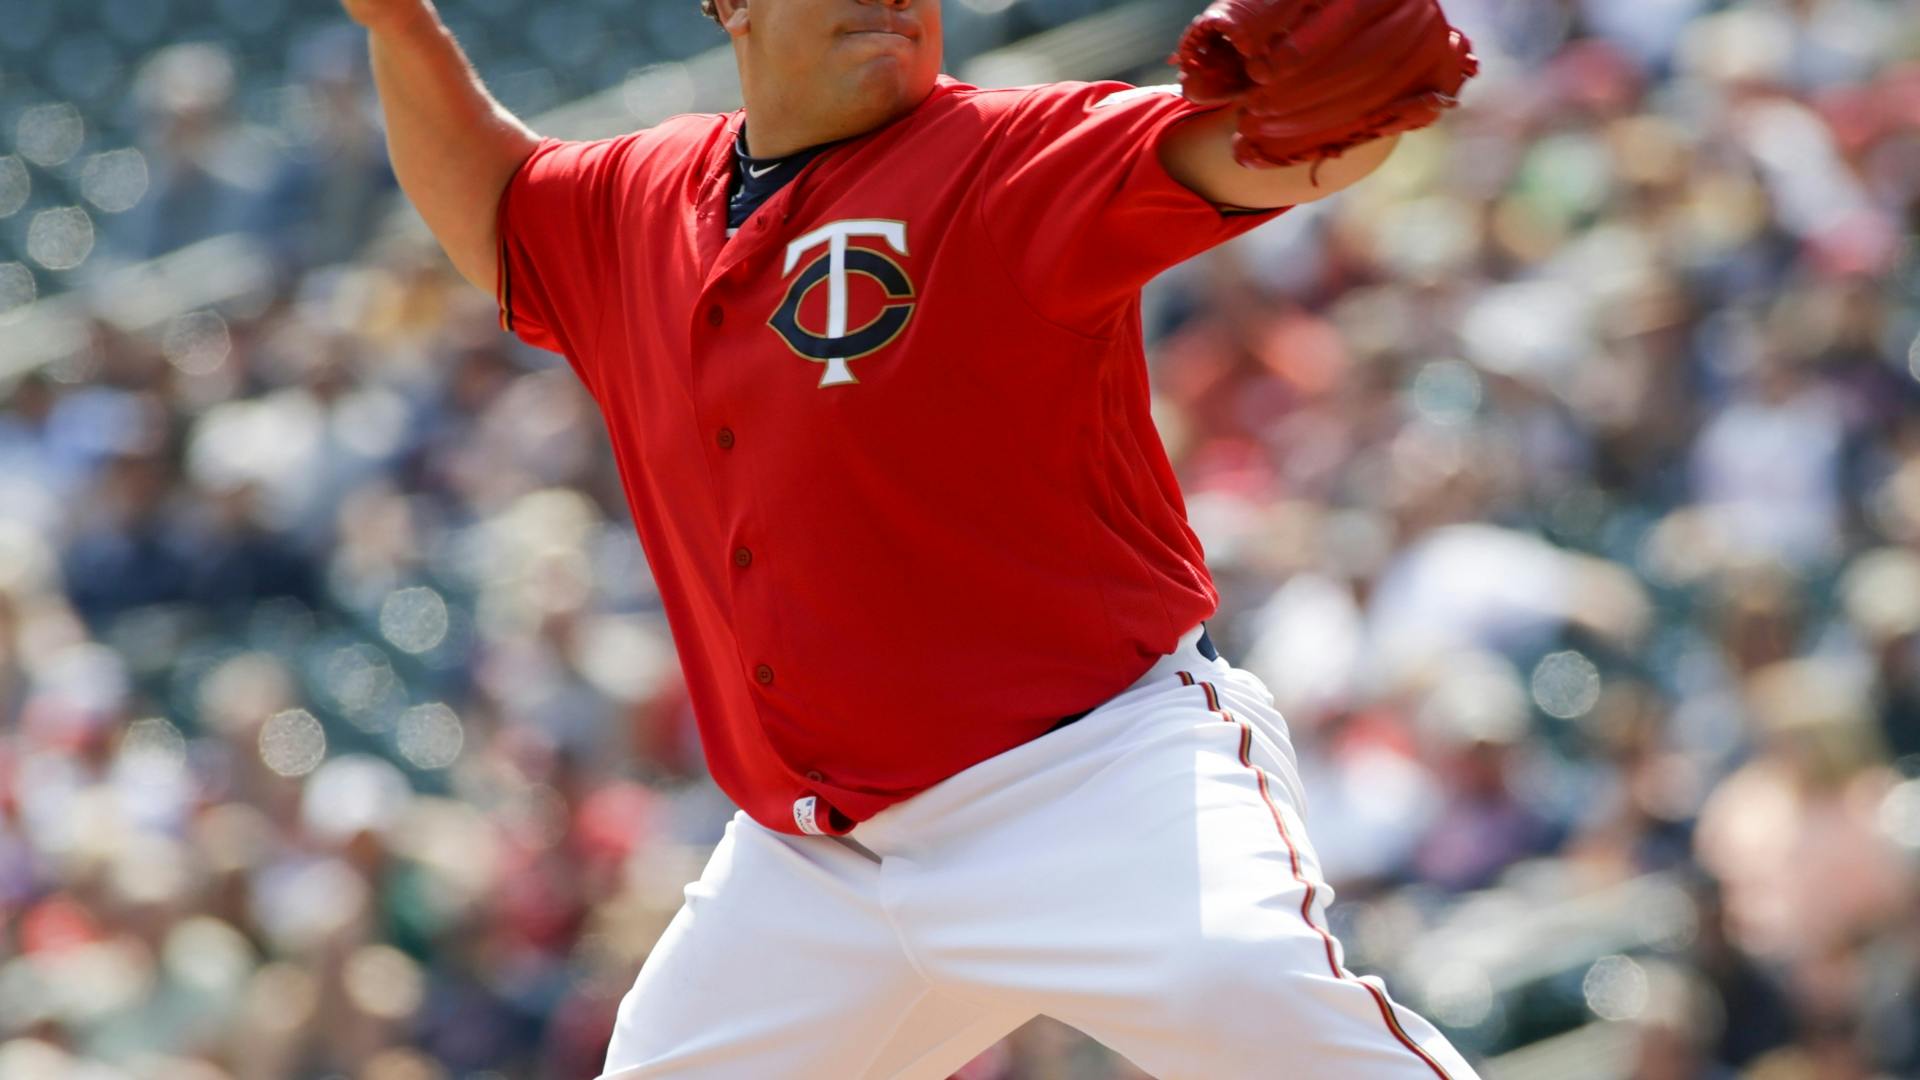 Twins righthander Bartolo Colon says his breaking pitches weren't sharp in Thursday, so he relied on his fastball more than usual against the White Sox.